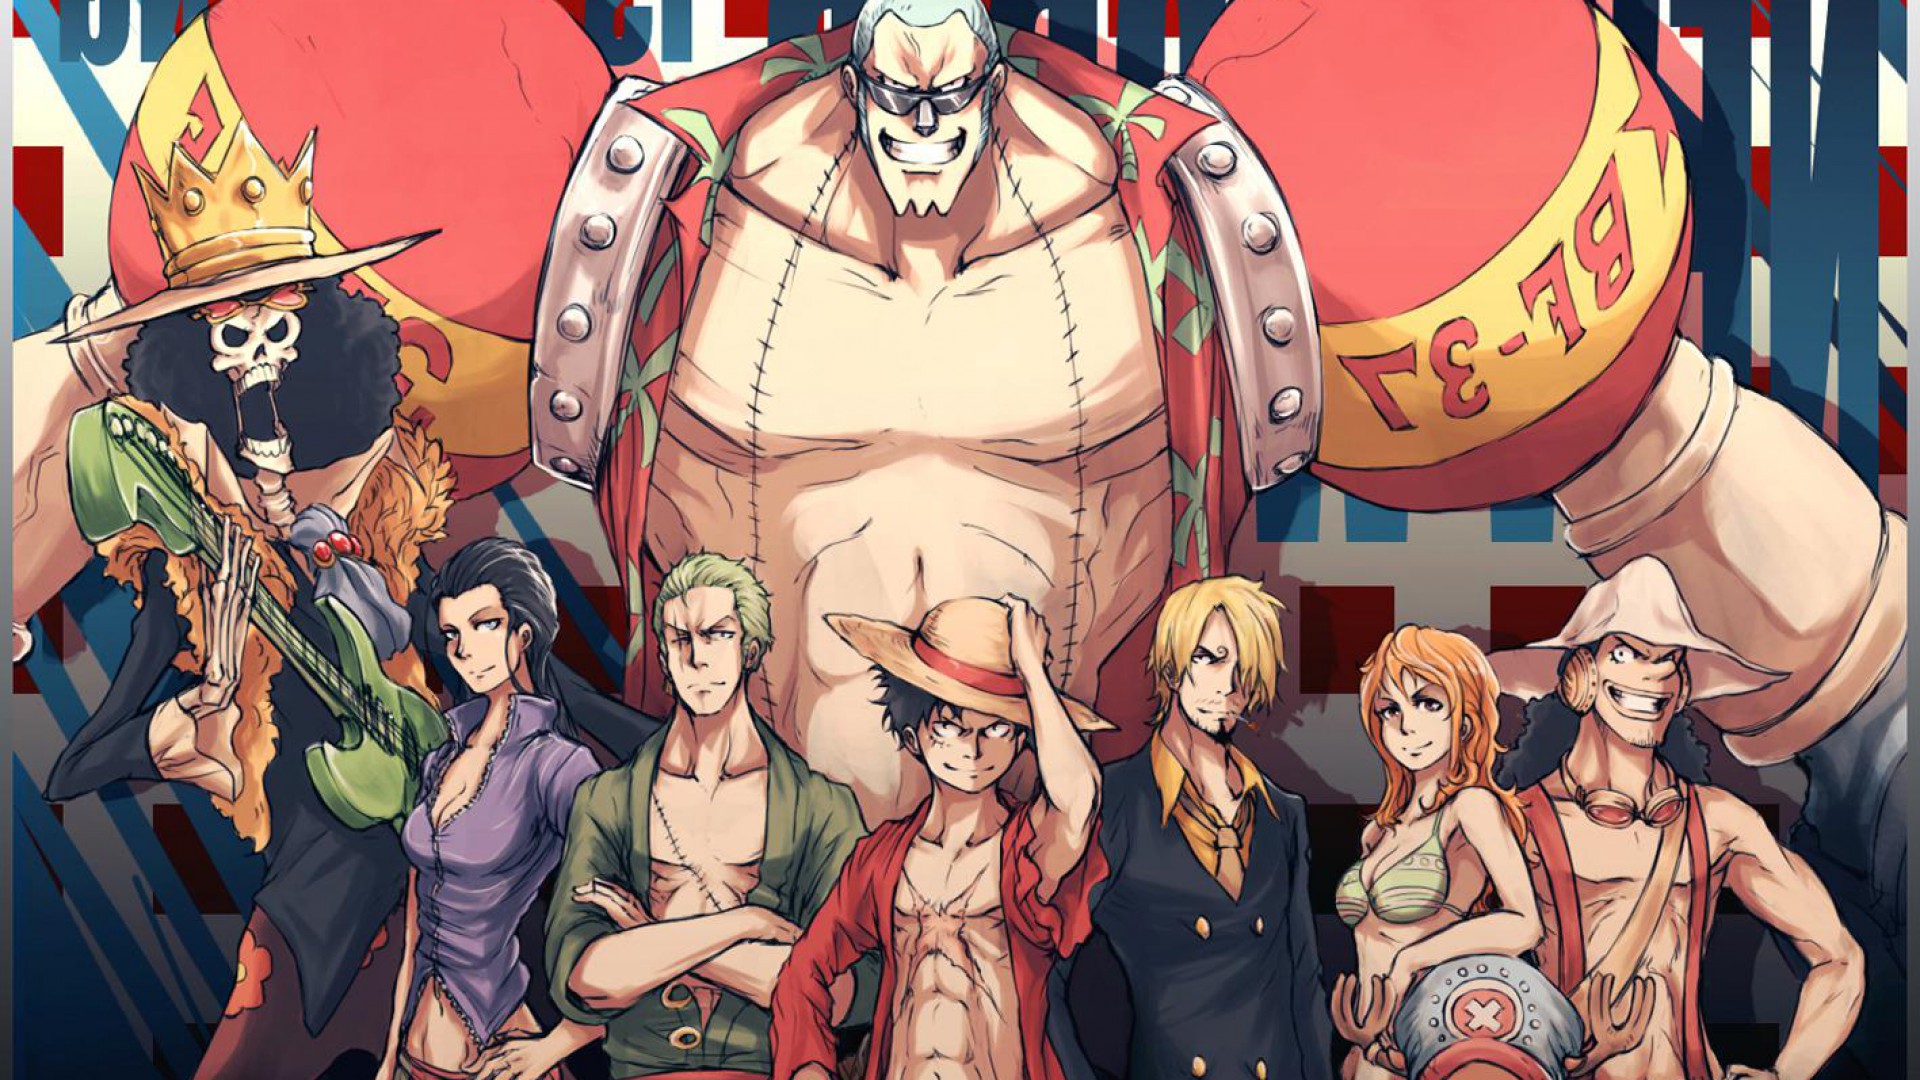 One Piece Wallpapers Best Wallpapers